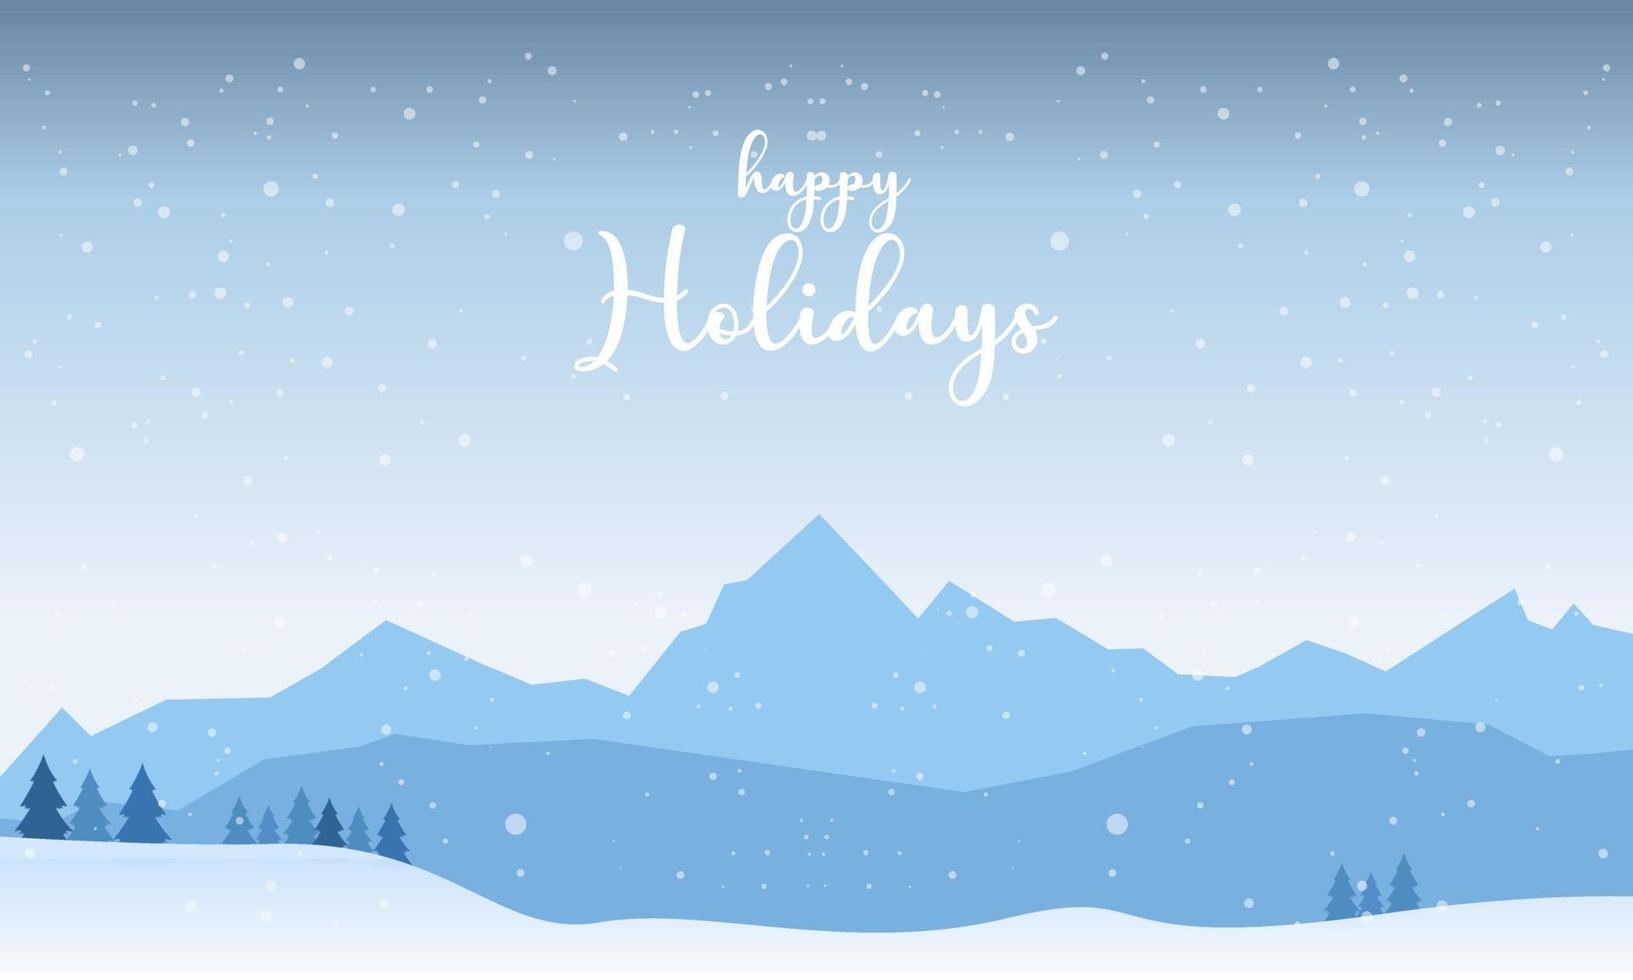 Blue mountains winter snowy landscape with hand lettering of Happy Holidays and pines on foreground illustration vector